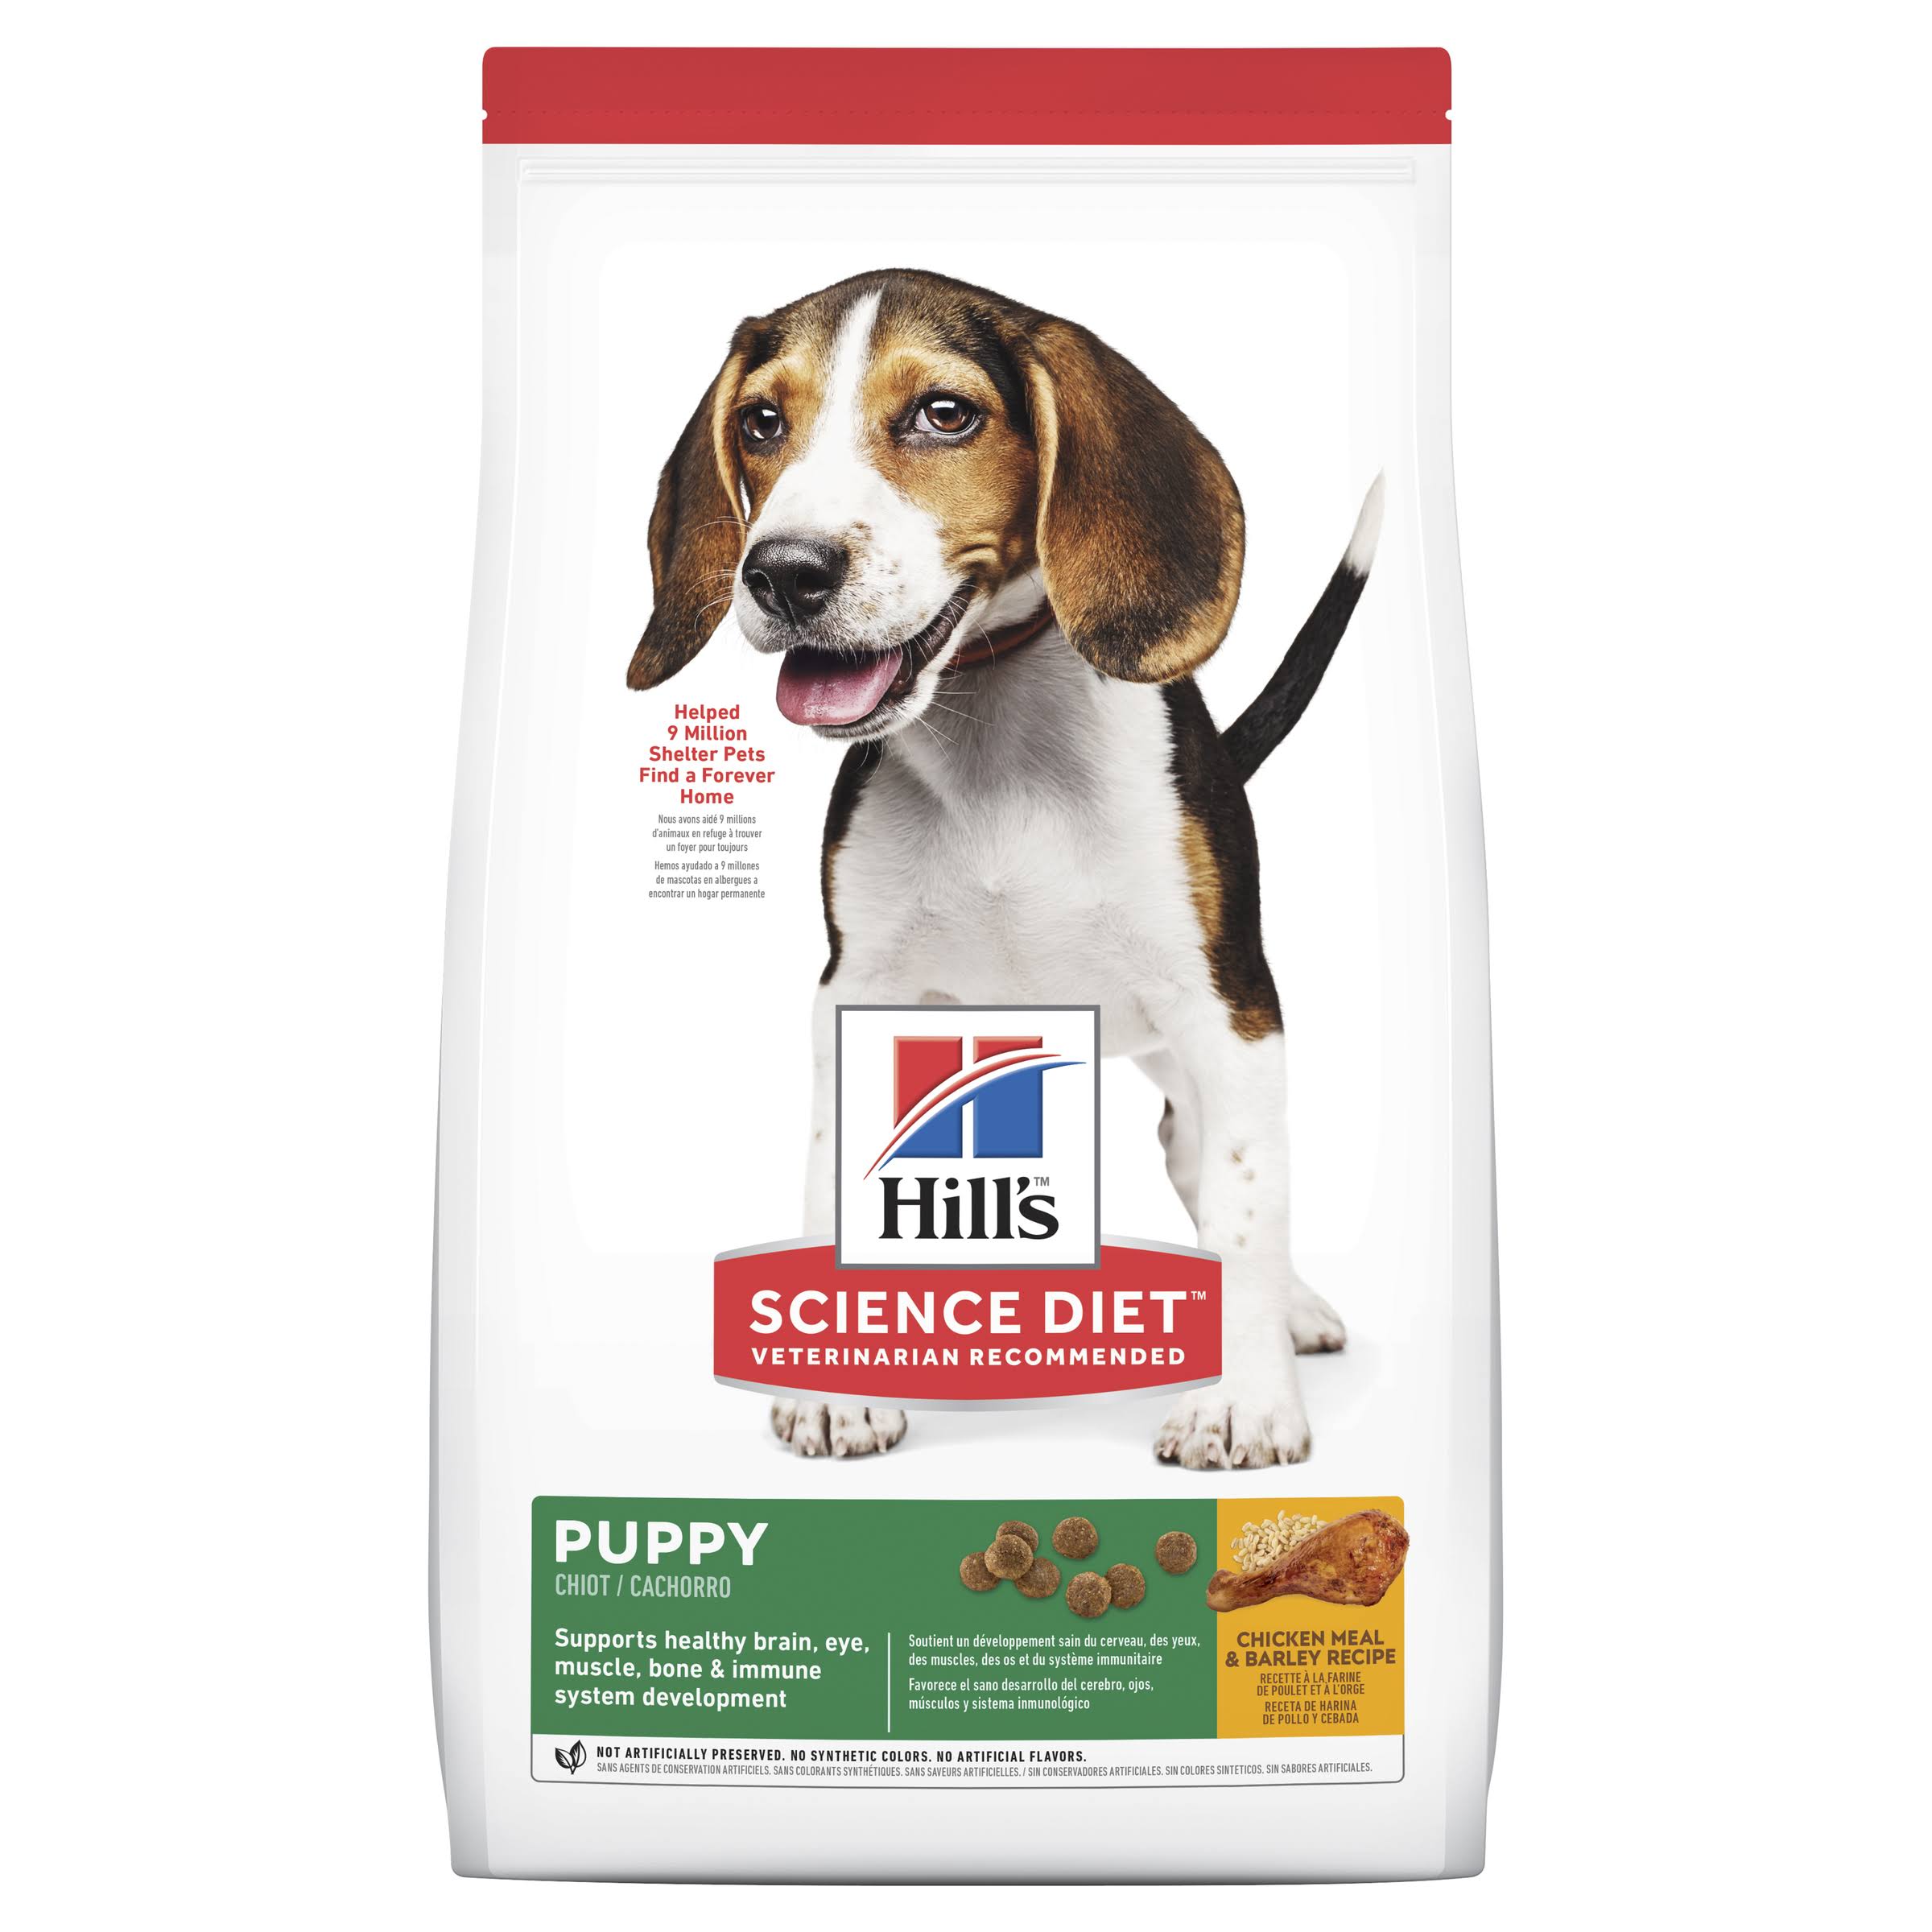 Hill's Science Diet Premium Natural Dog Food - Chicken Meal & Barley, 15.5lb